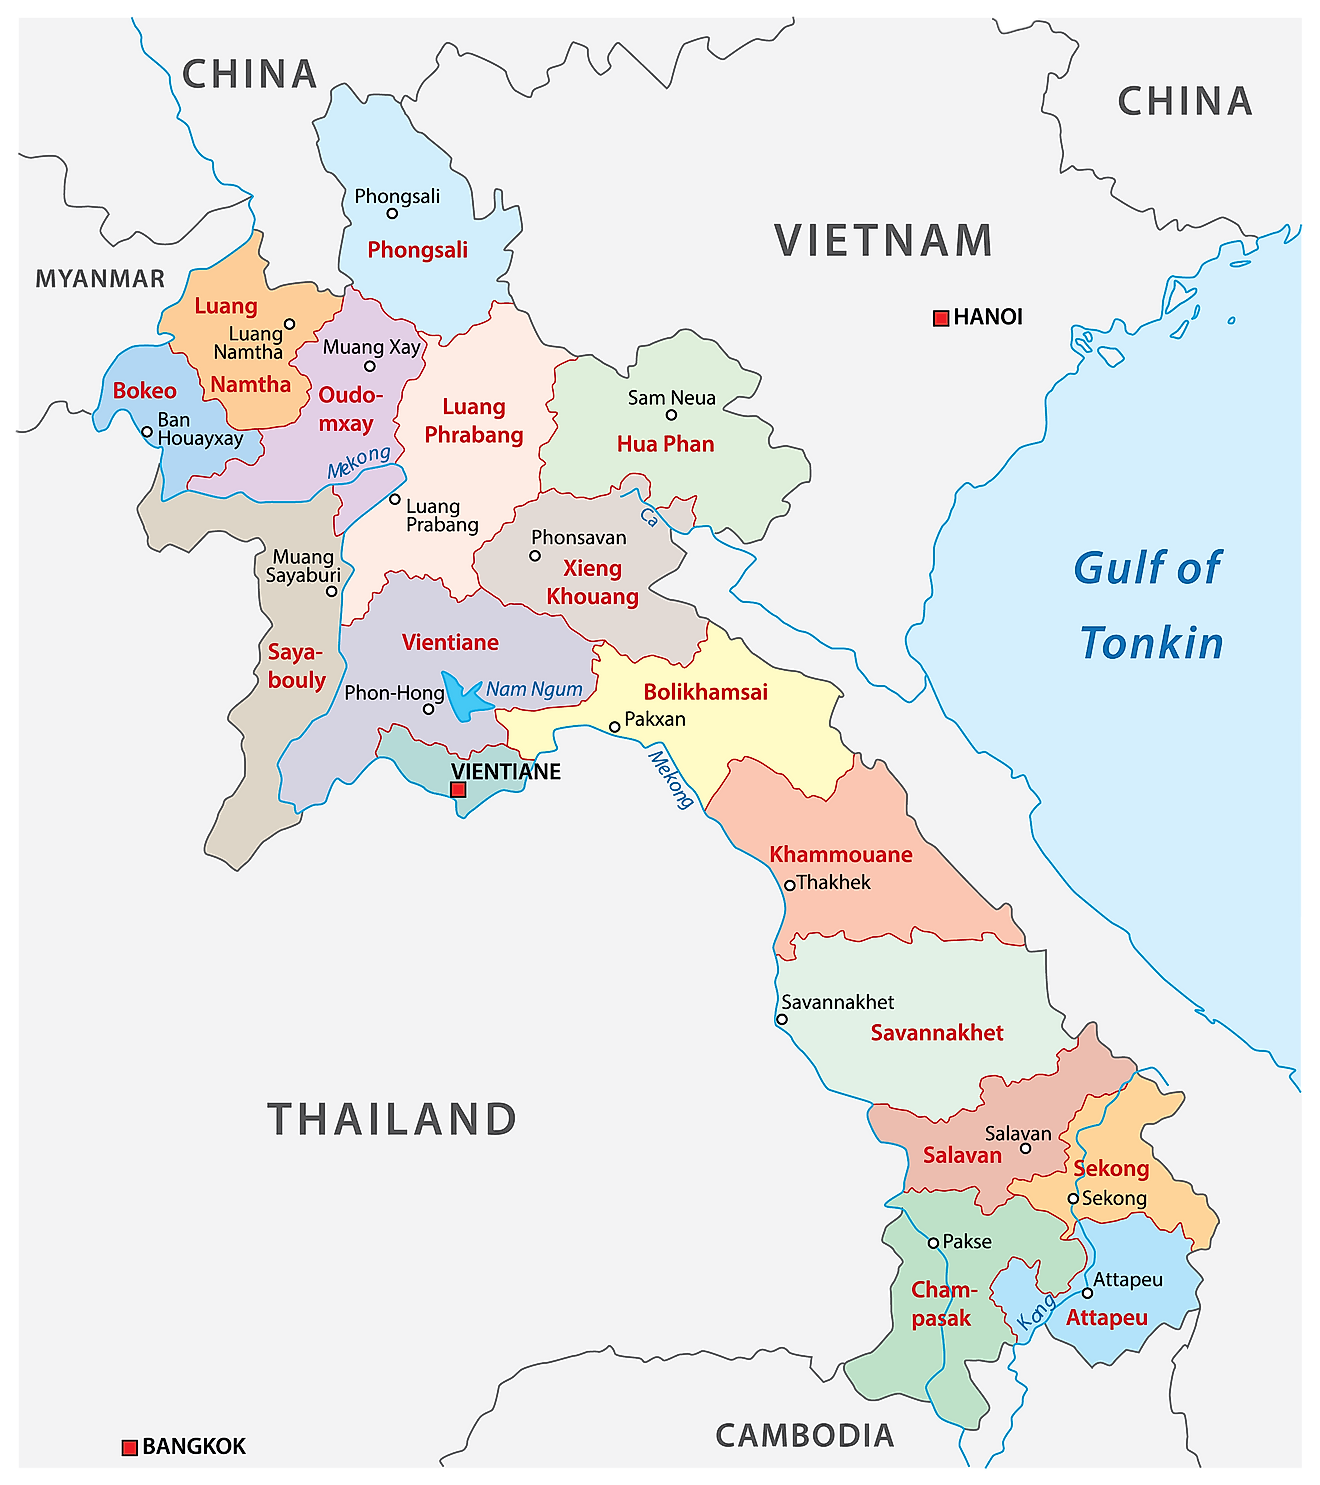 Location Map of Laos showing the 17 provinces, their capitals, and the national capital of Vientiane.